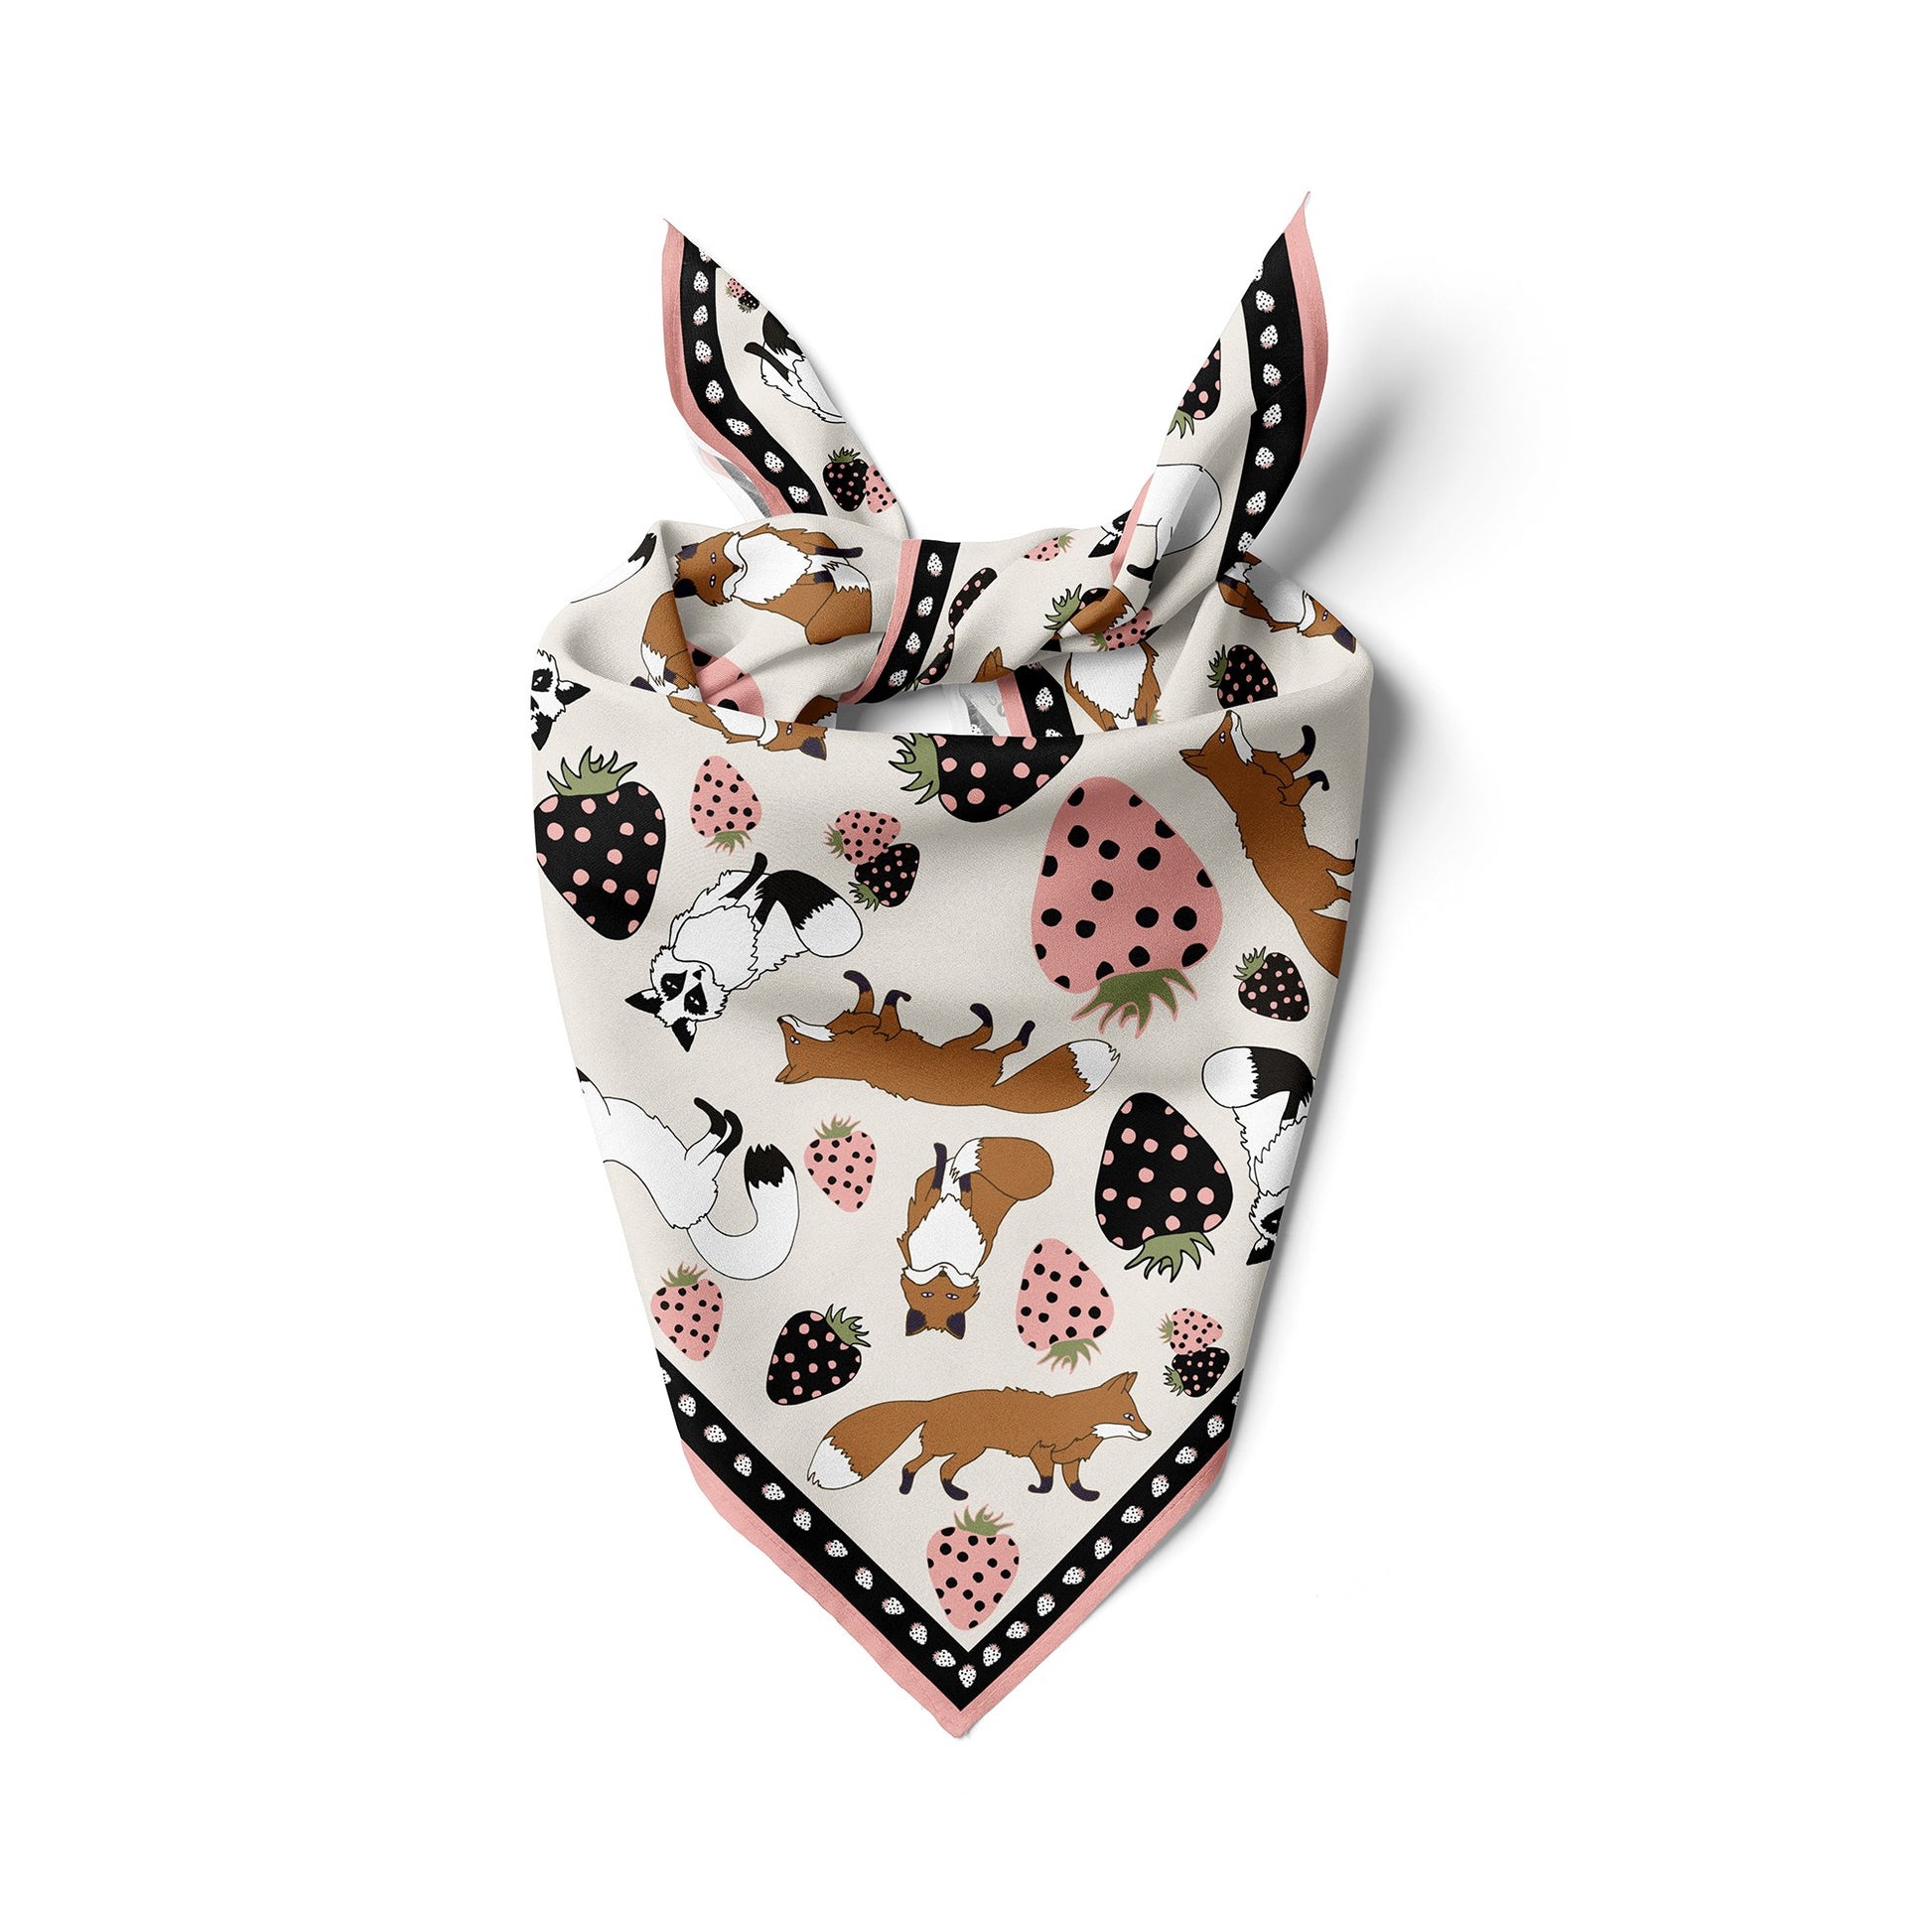 Tied cotton silk blend  bandana with strawberries and foxes.